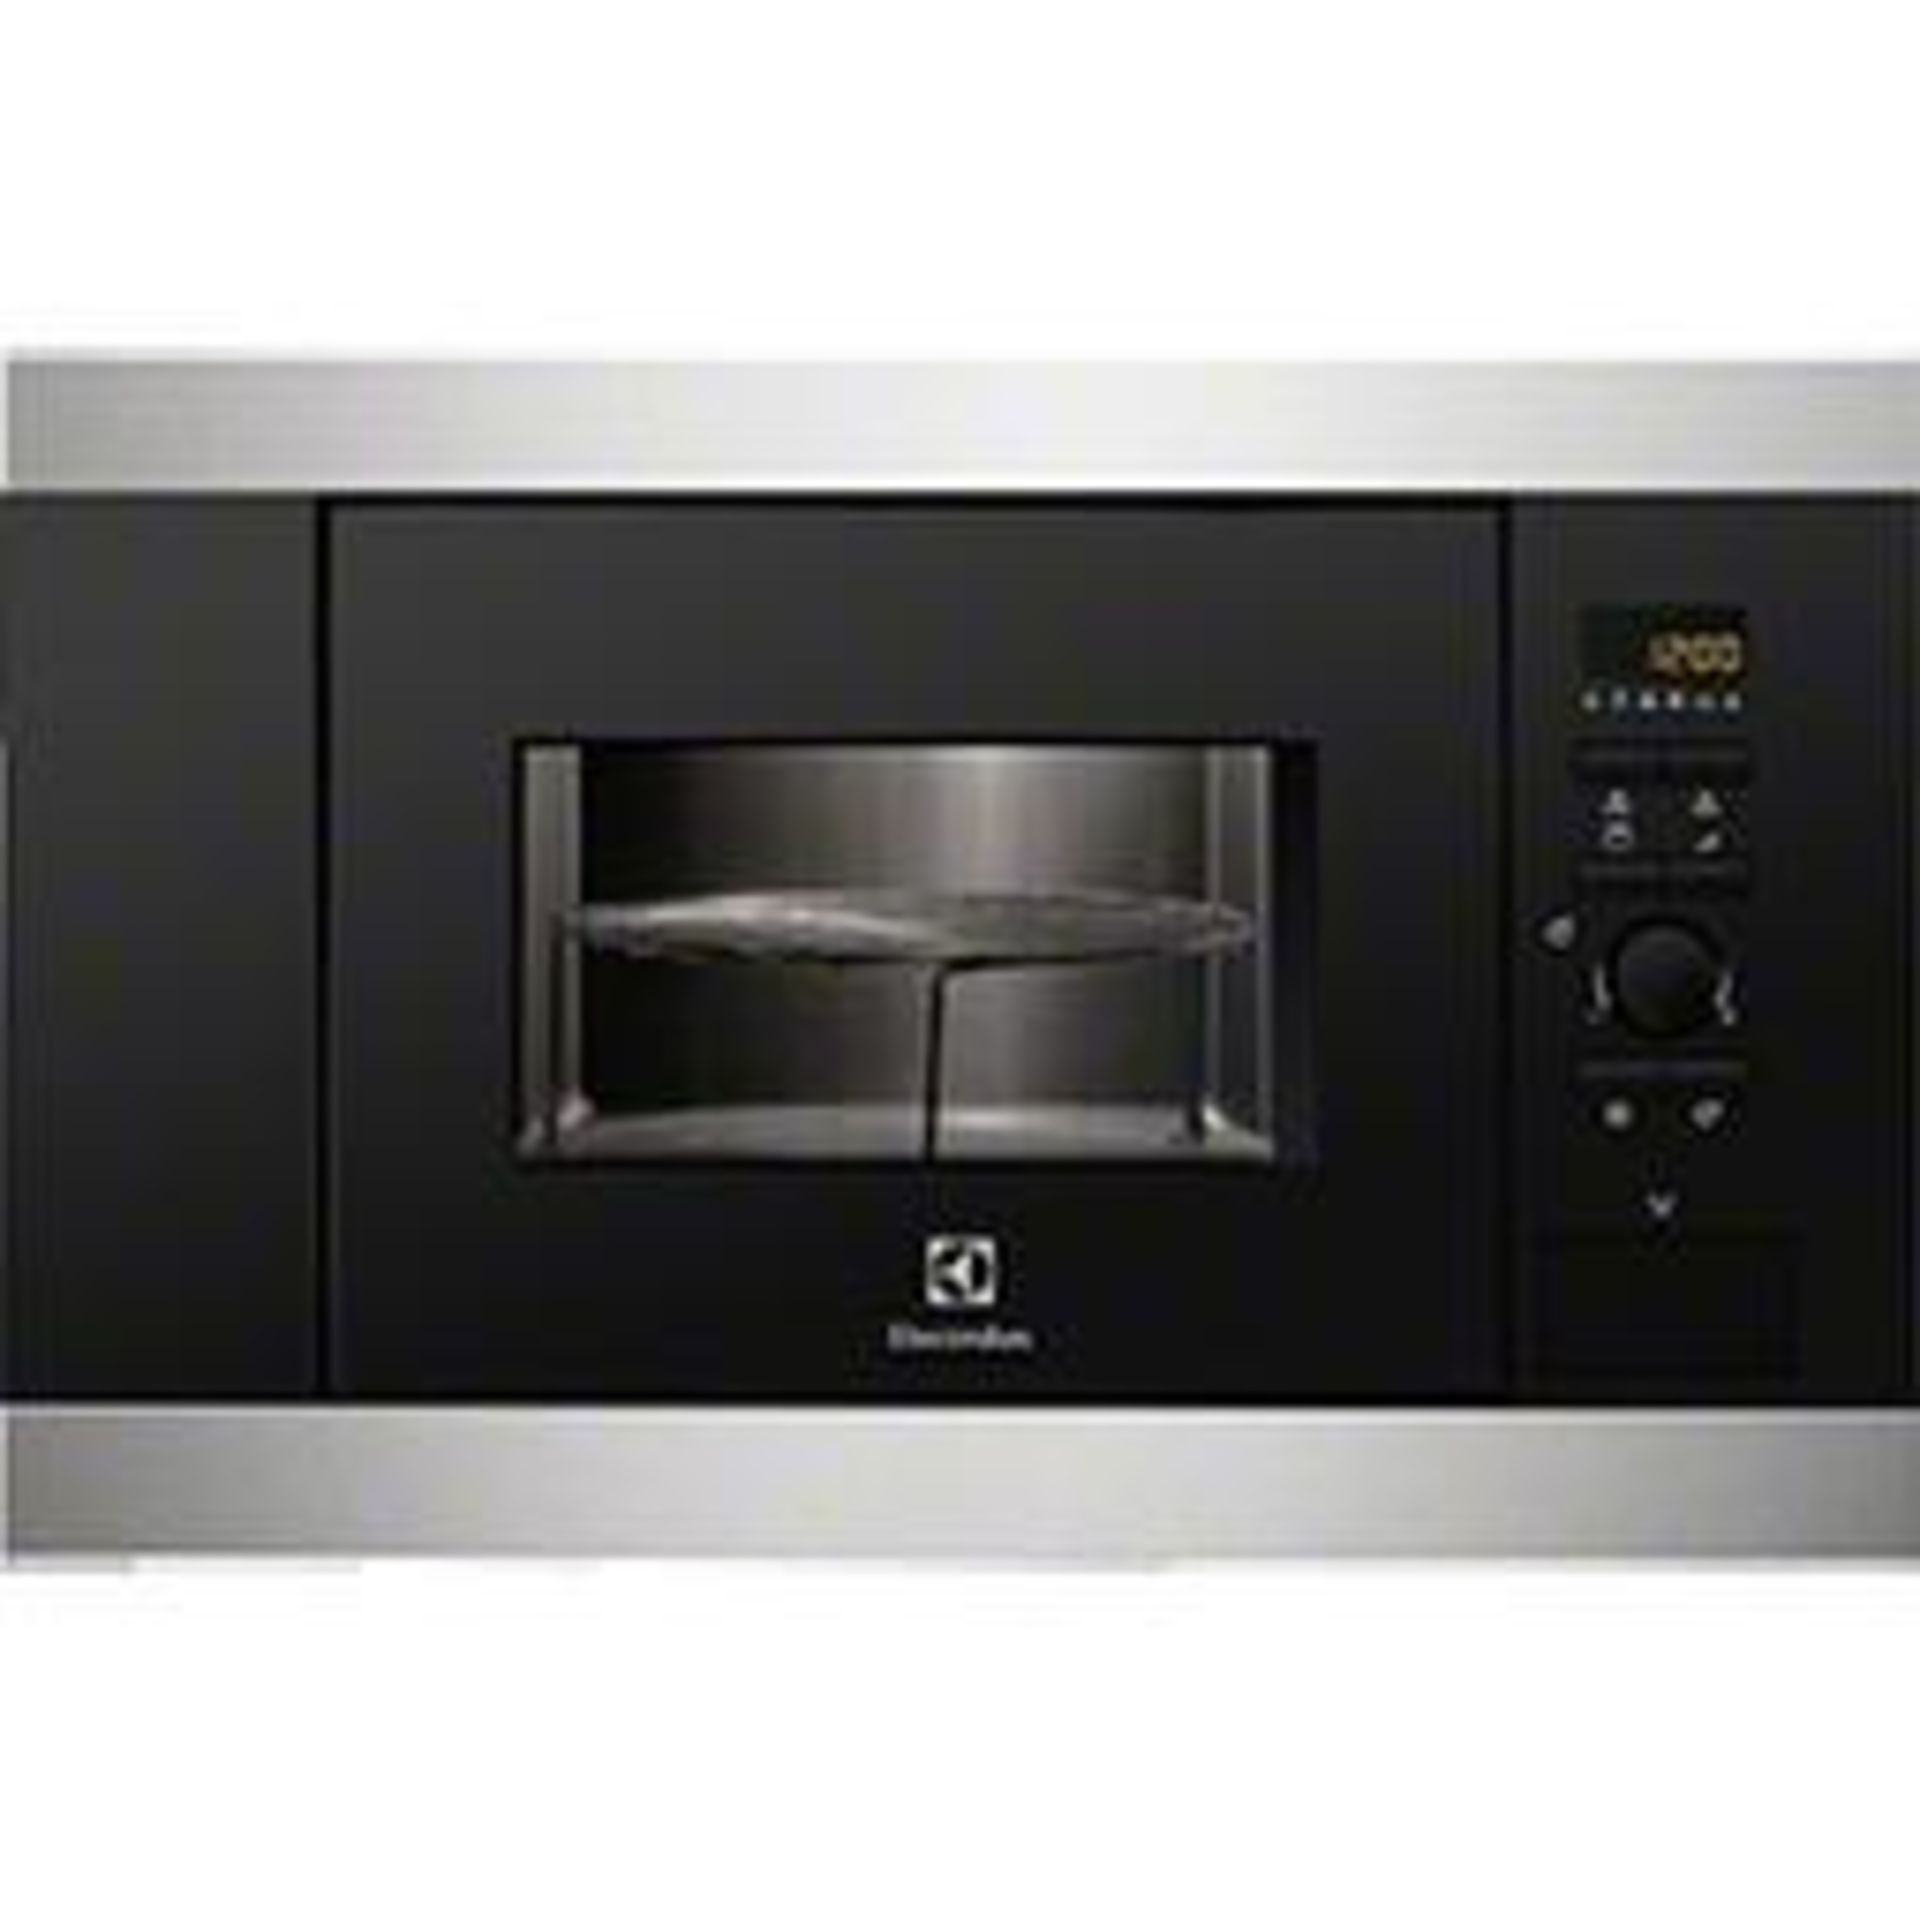 Electrolux EMS17256OX | Integrated Built-in Microwave Oven & Grill in Stainless Steel Oven capacity: